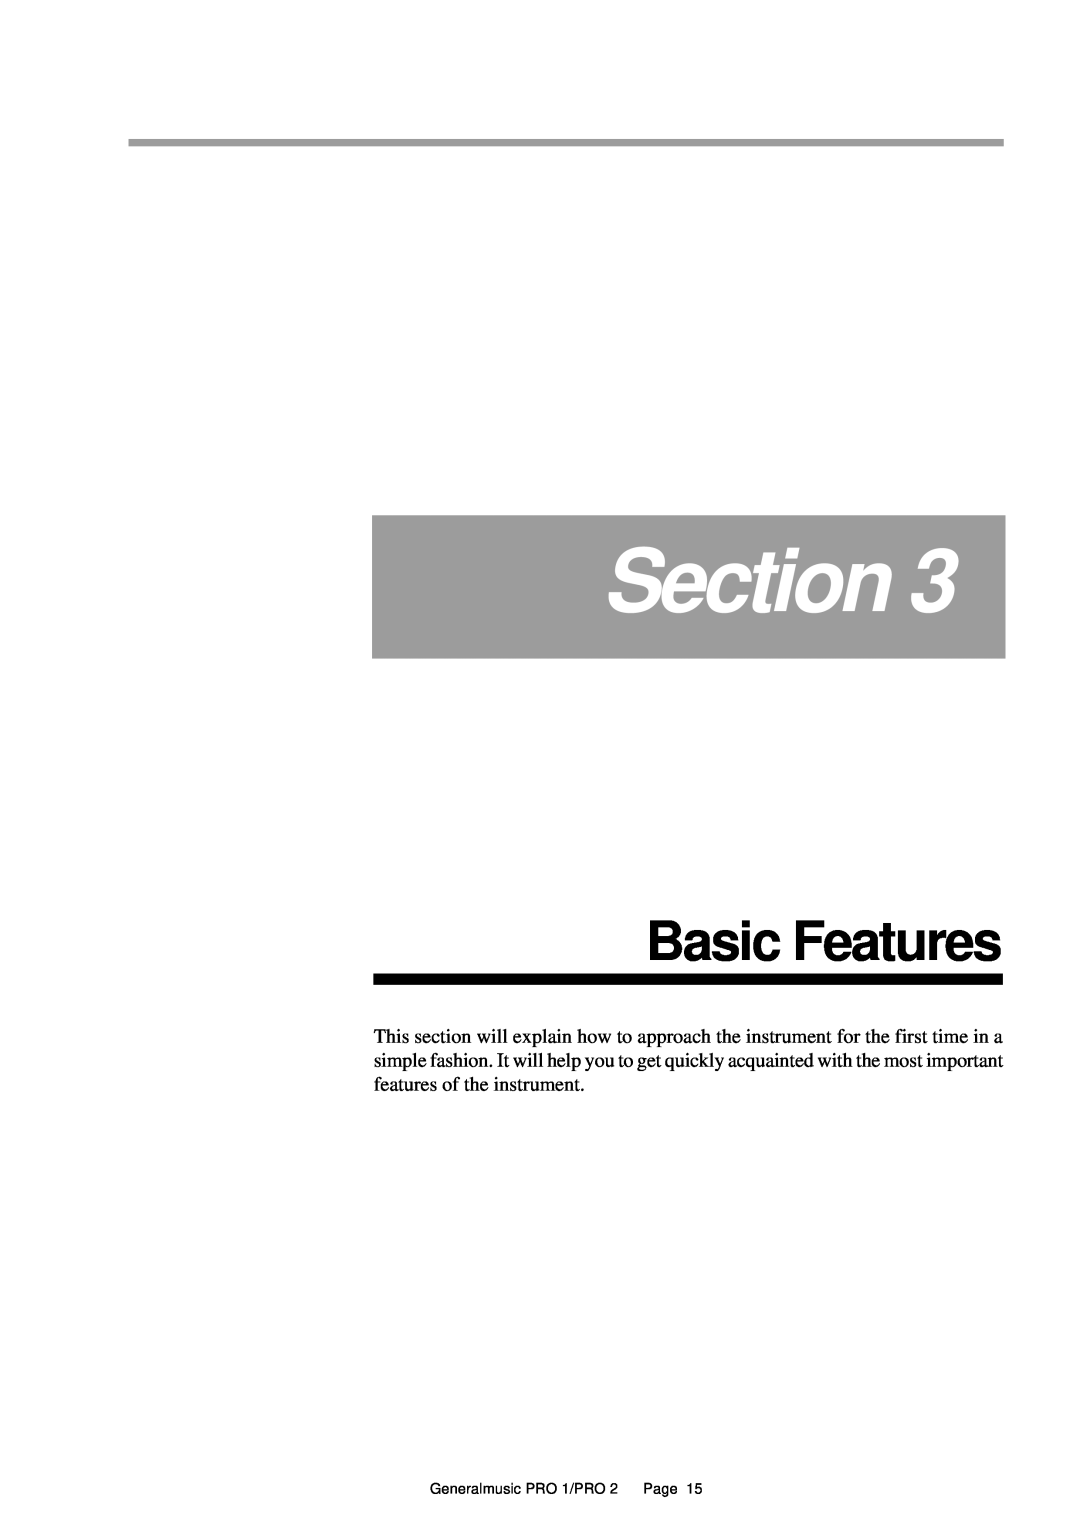 Peavey Pro 2, Pro 1 owner manual Basic Features, Section, Generalmusic PRO 1/PRO 2 Page 